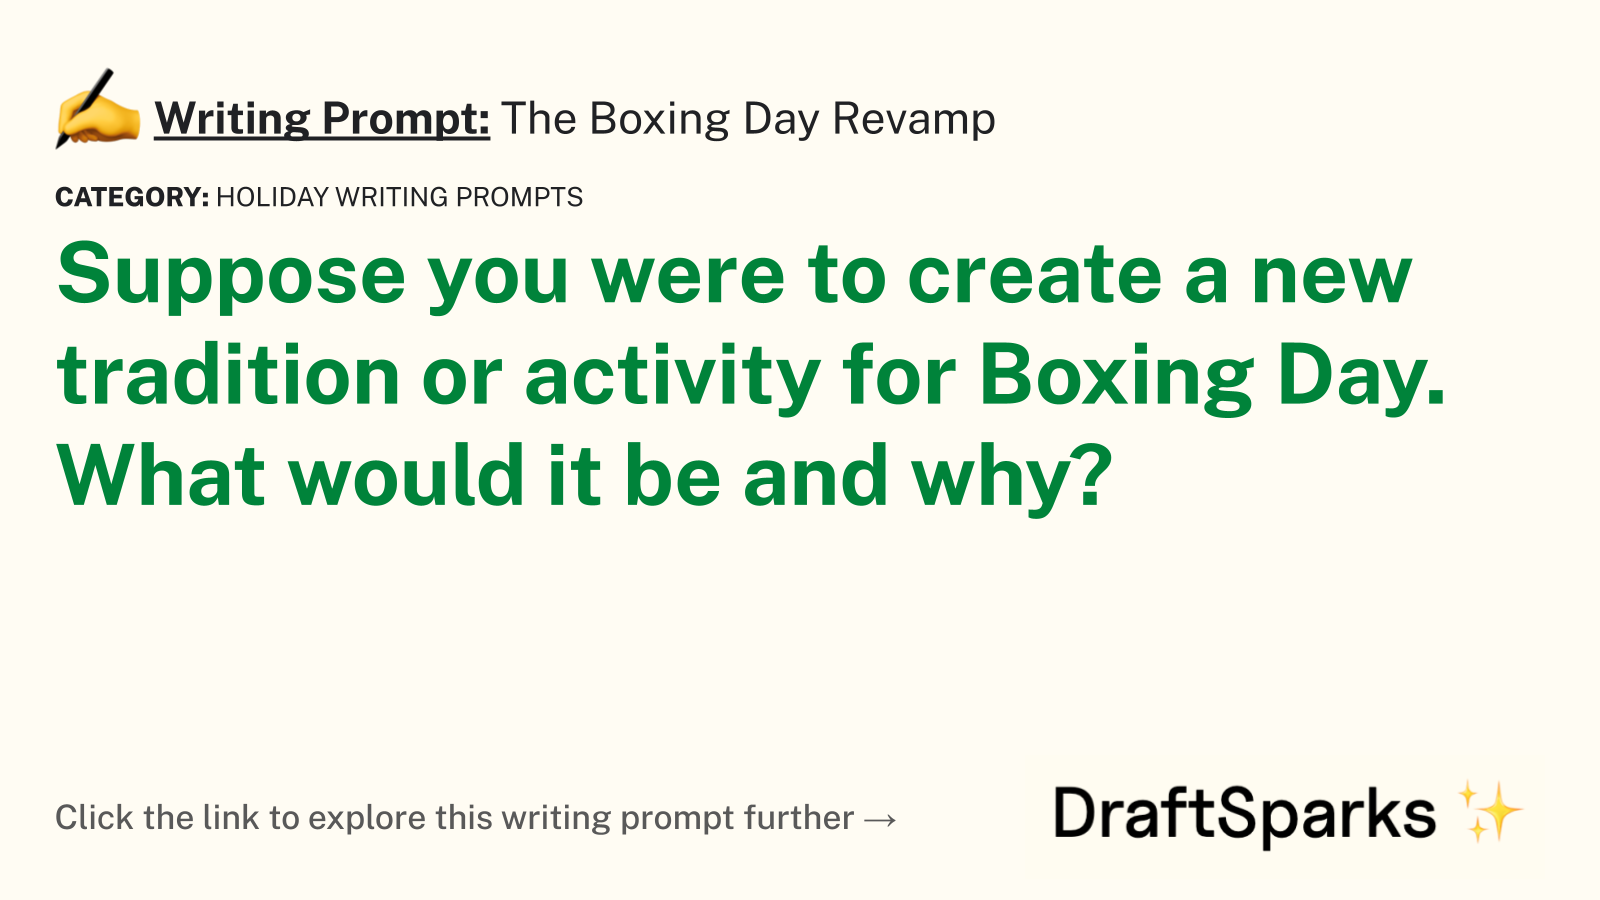 The Boxing Day Revamp